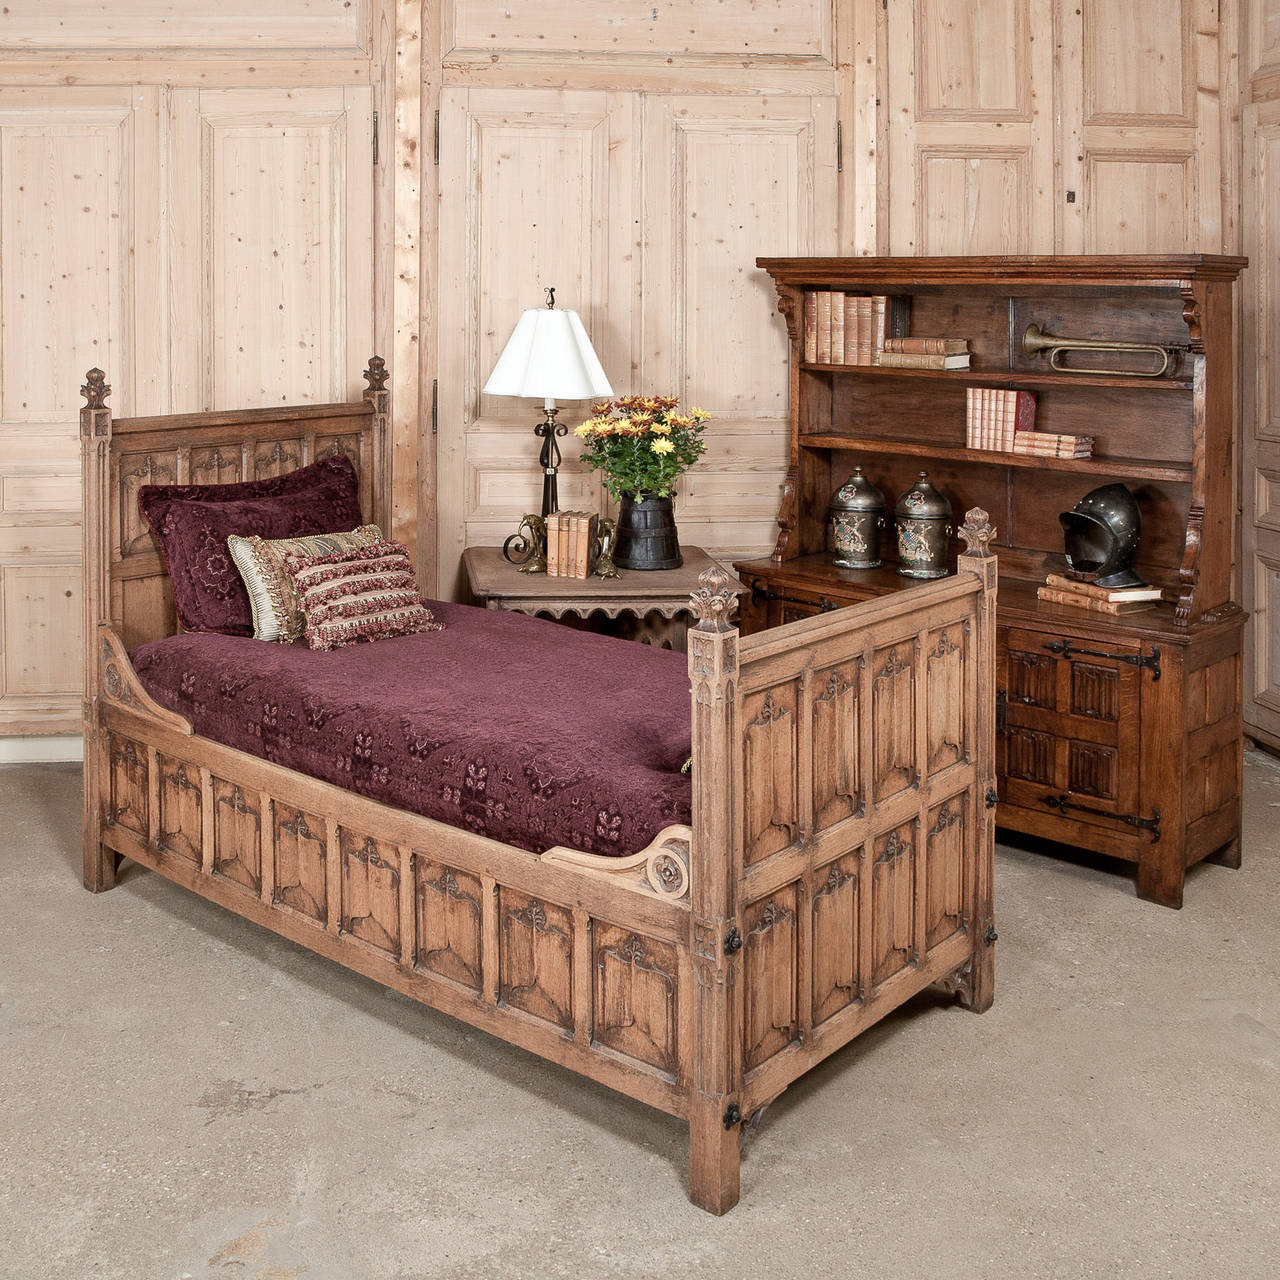 This amazing interpretation of the French Gothic style has the most linenfold panels of any piece we've ever seen! Carved on the inside and outside of all four sides of this amazing bed with the Gothic motif, it features high rails making it the